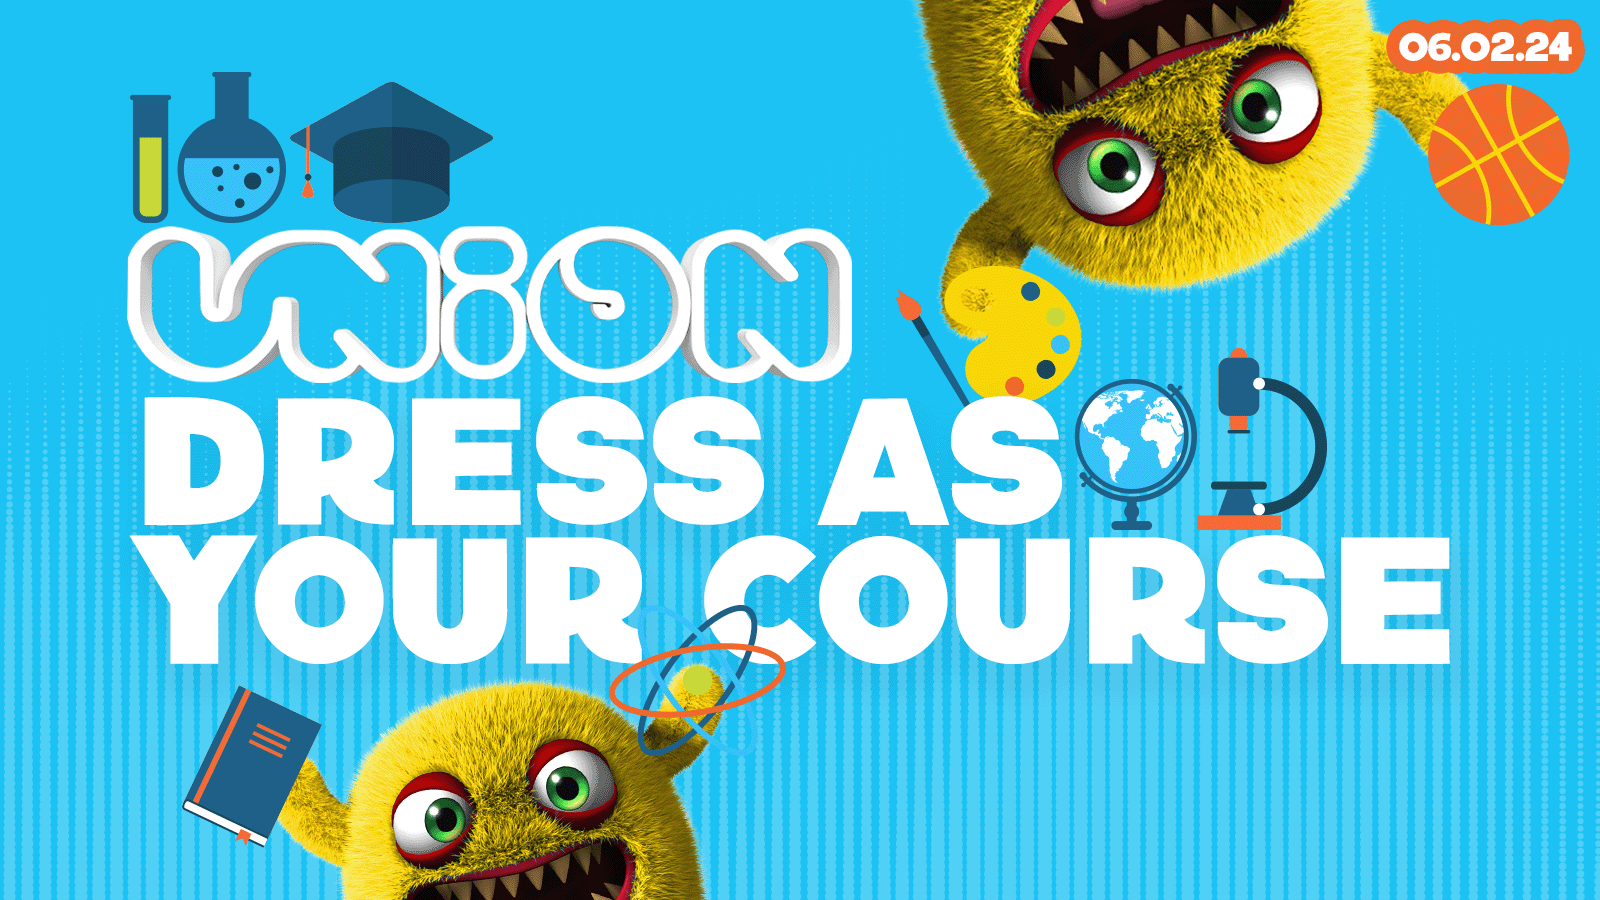 UNION TUESDAY’S // DRESS AS YOUR COURSE